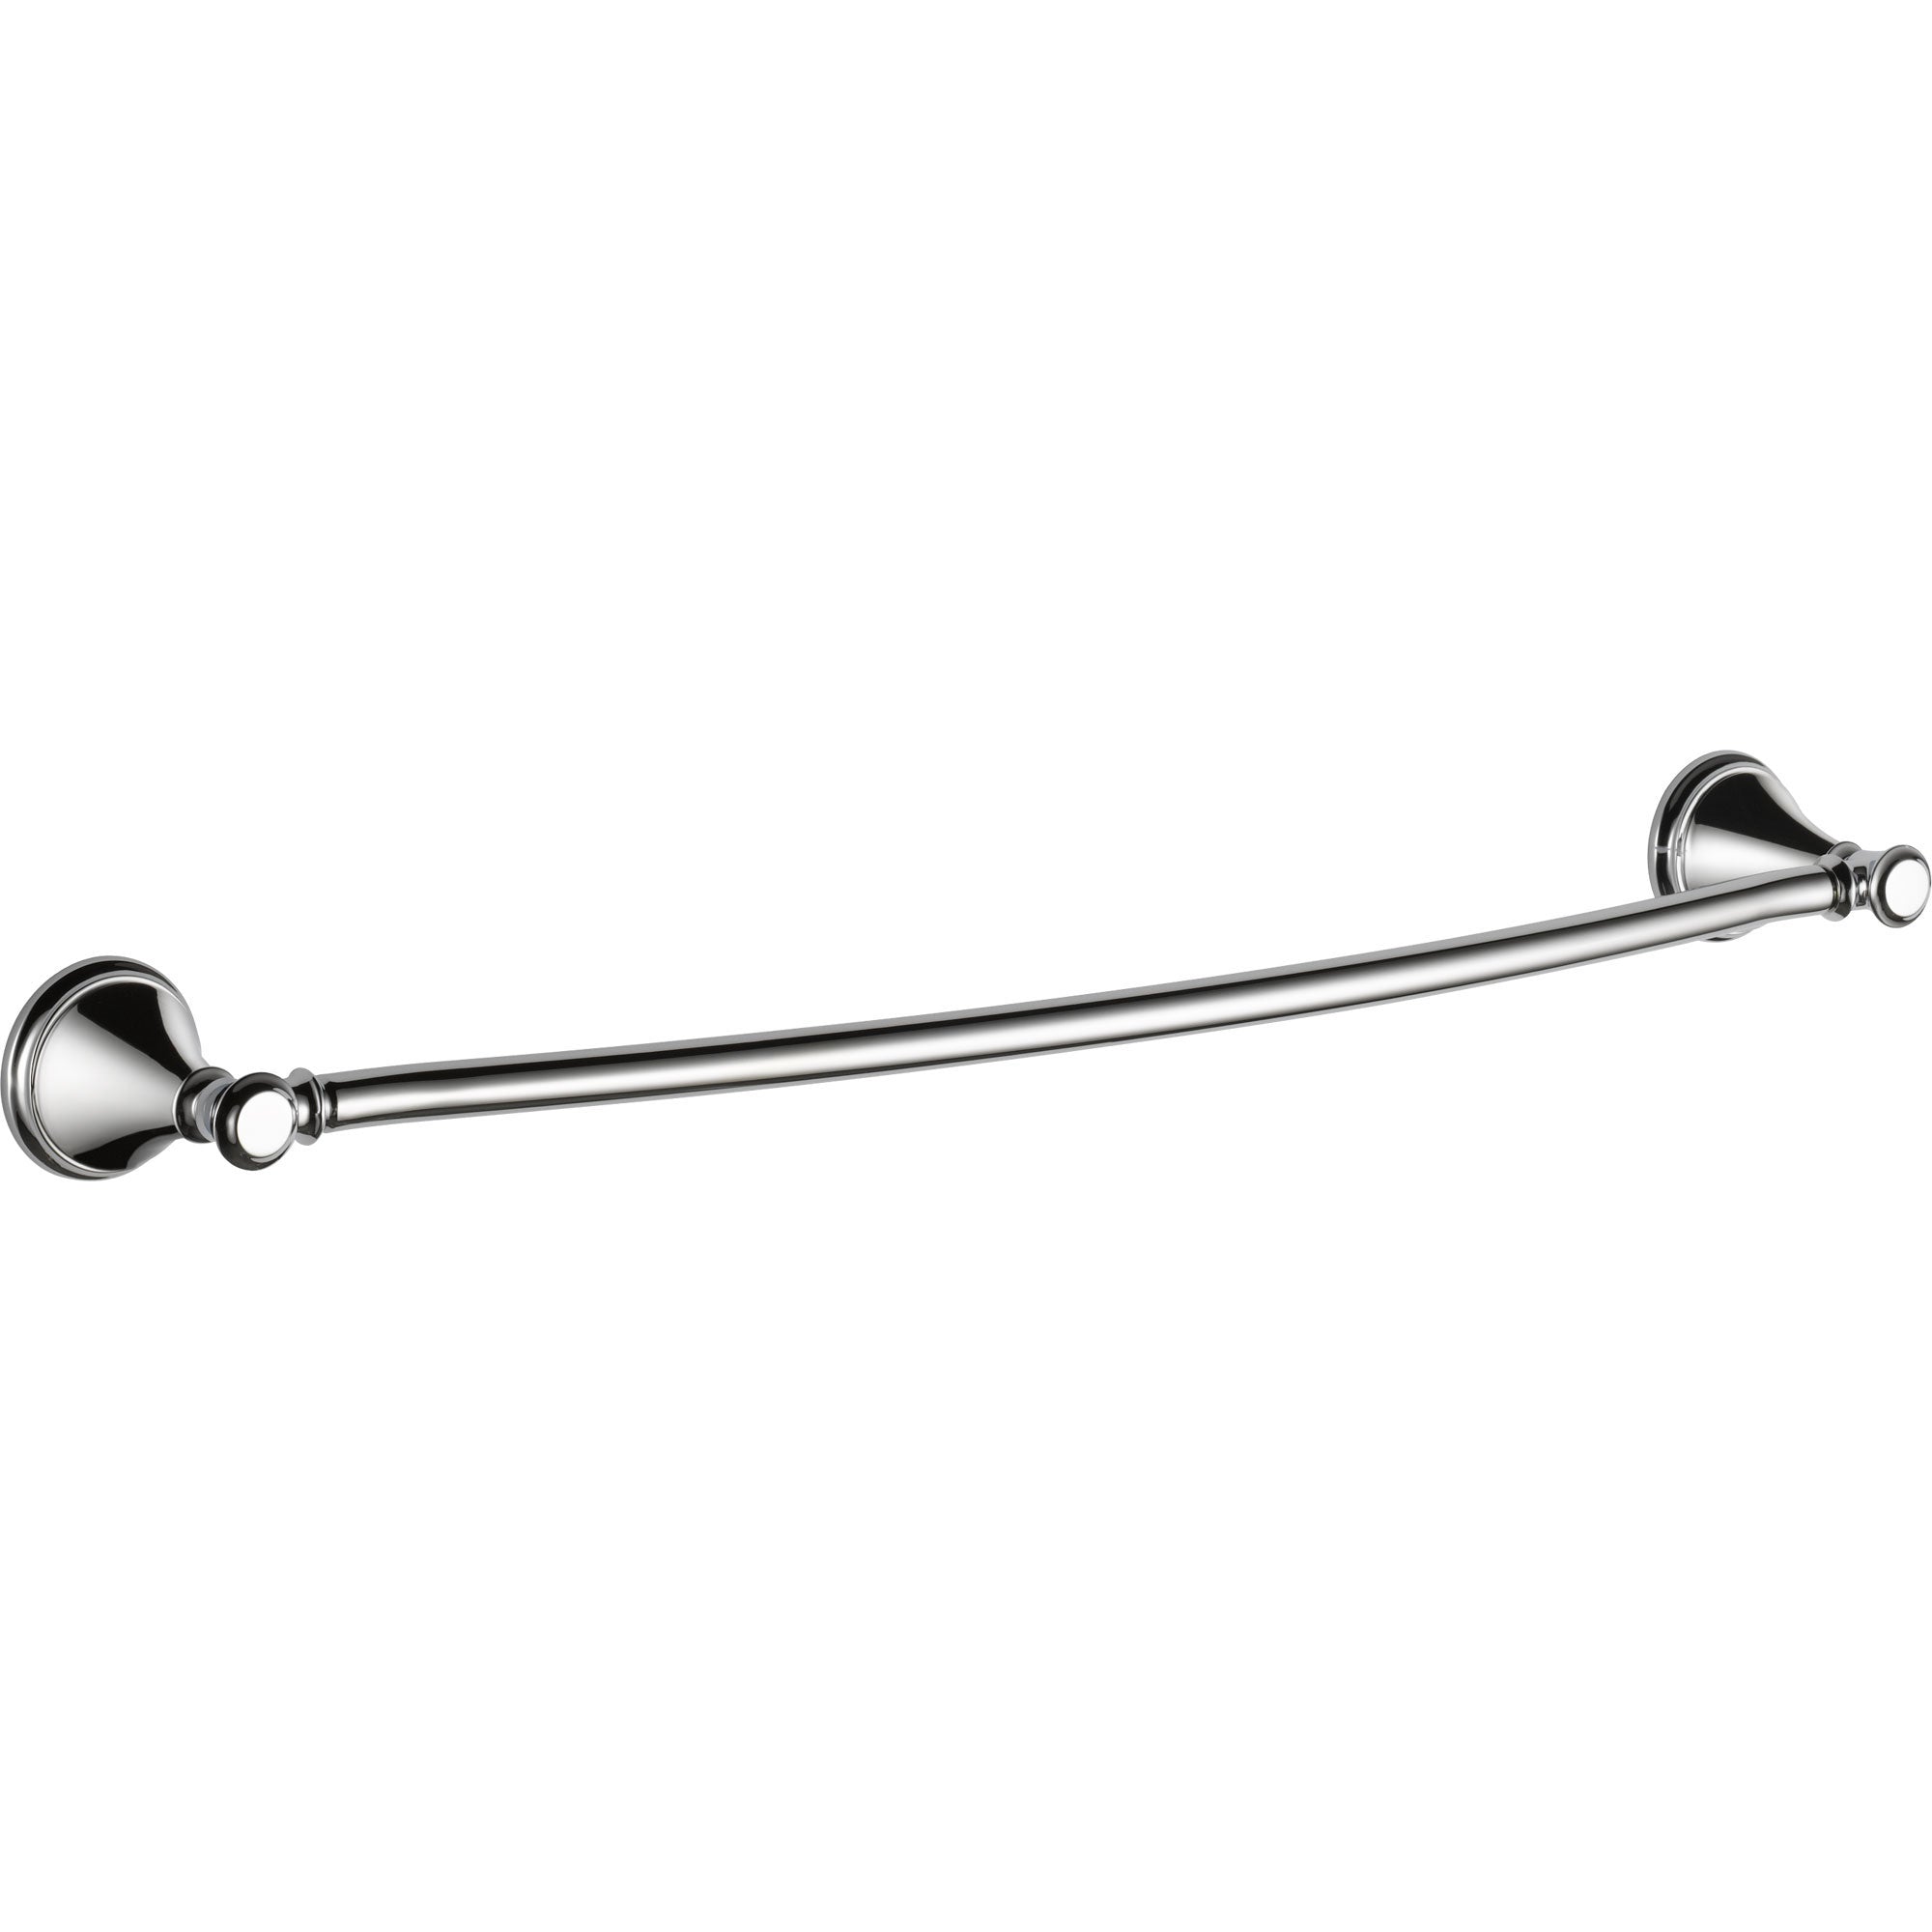 Delta Cassidy Chrome DELUXE Accessory Set Includes: 24 Towel Bar, Pap 